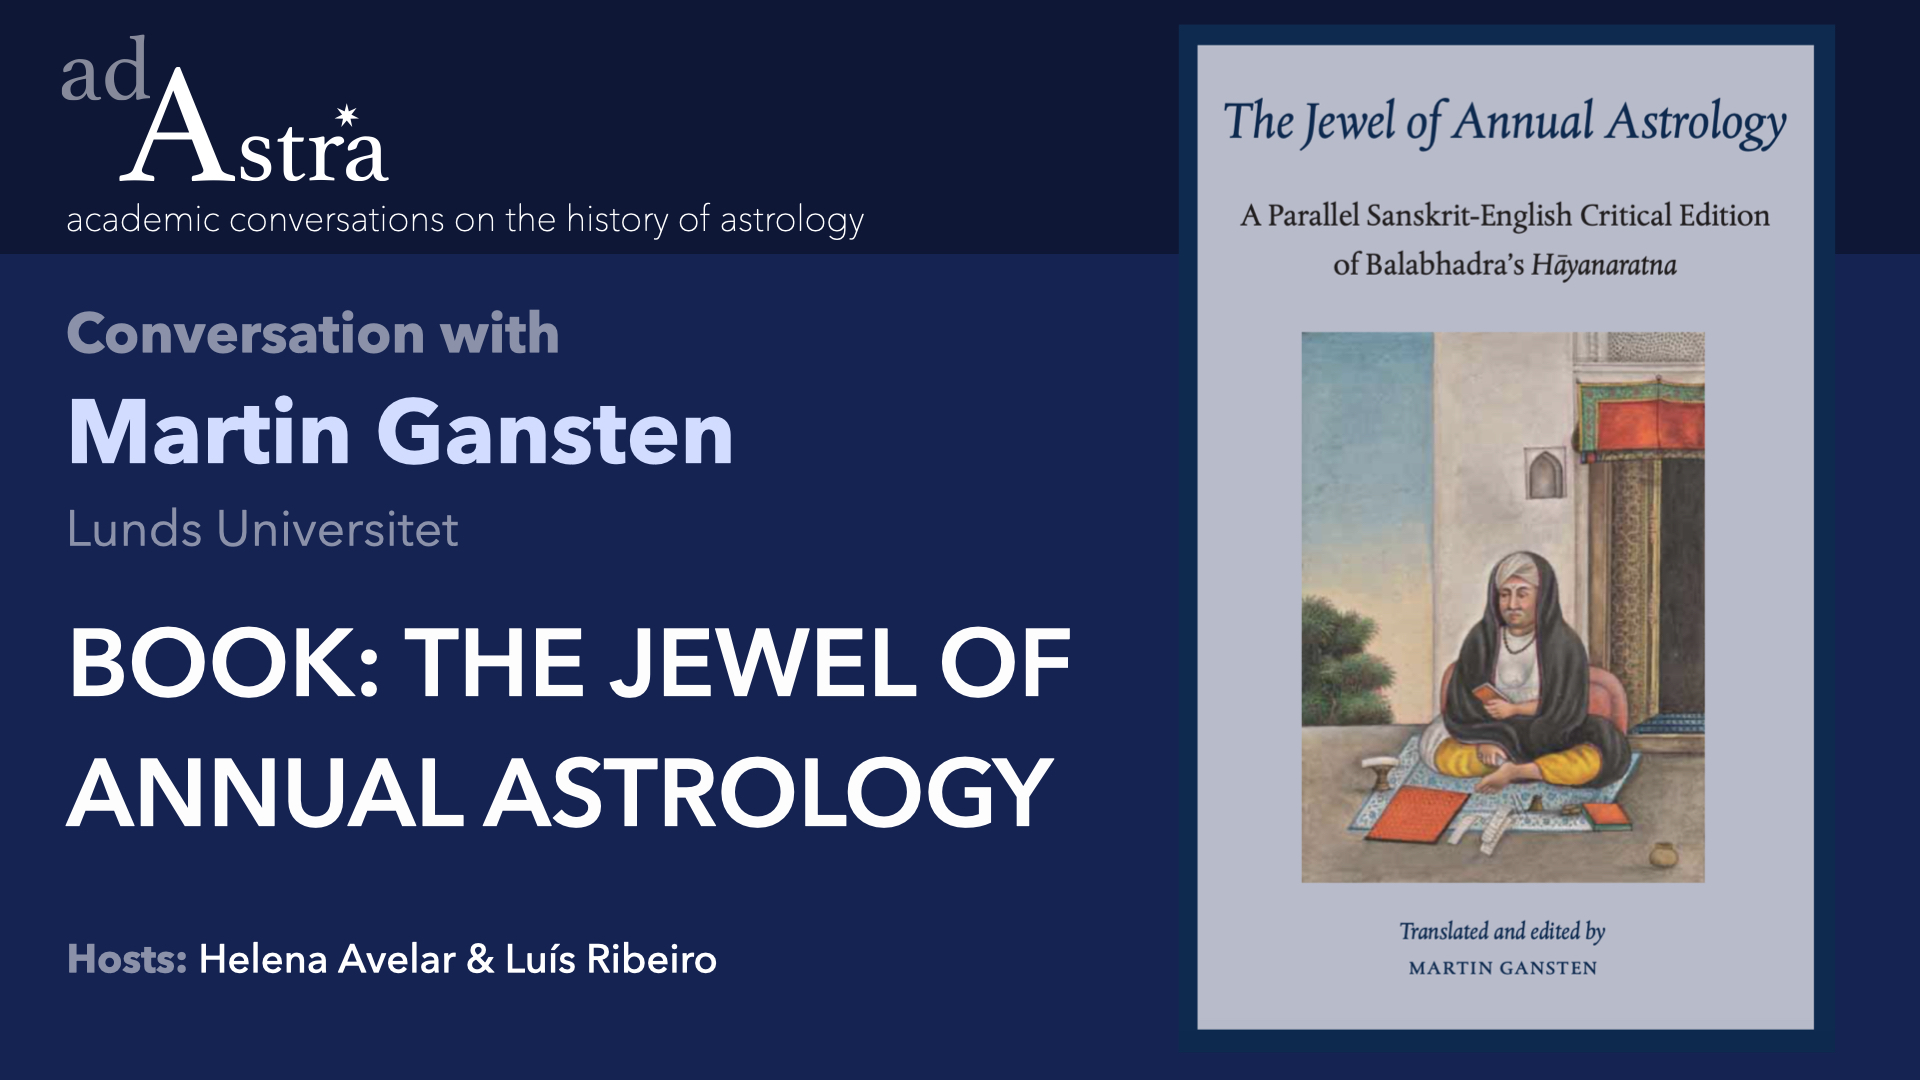 Book: The Jewel of Annual Astrology edited by Martin Gansten